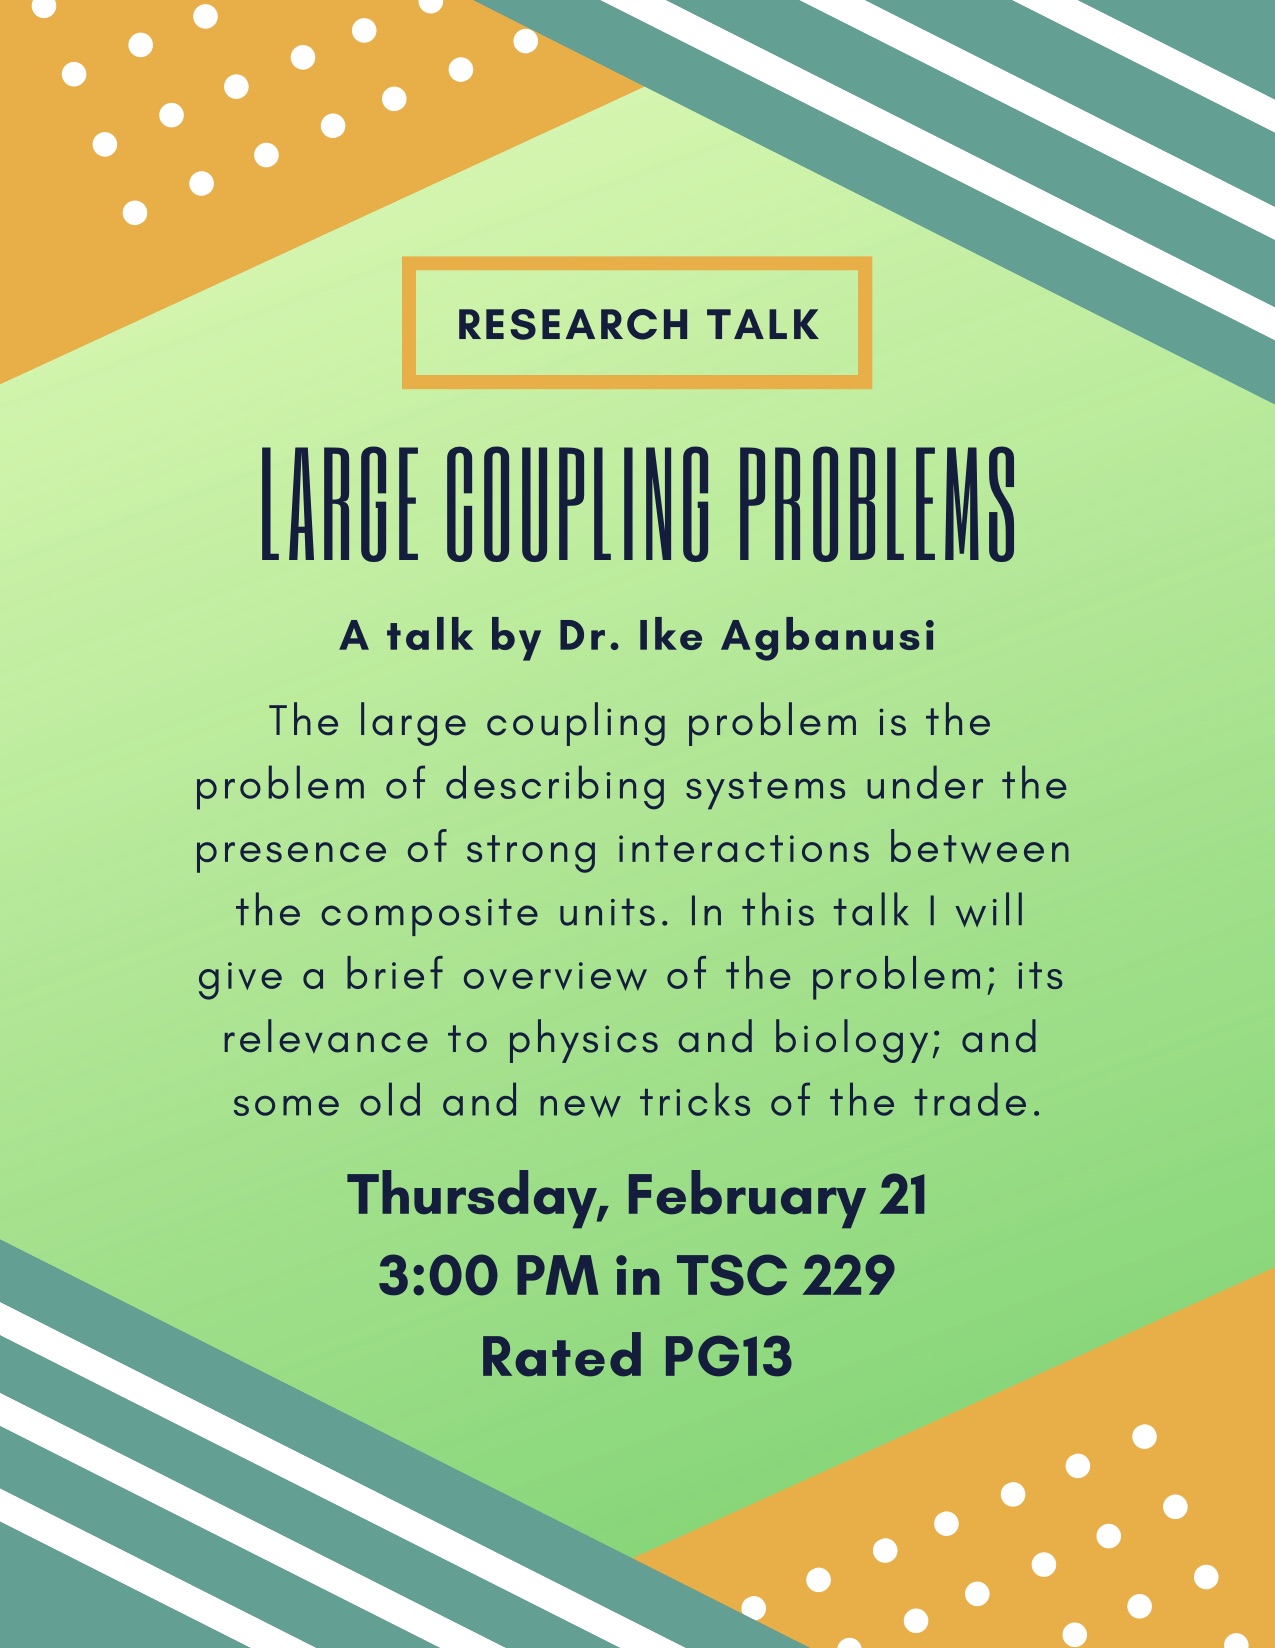 Feb 21 - Large Coupling Problems